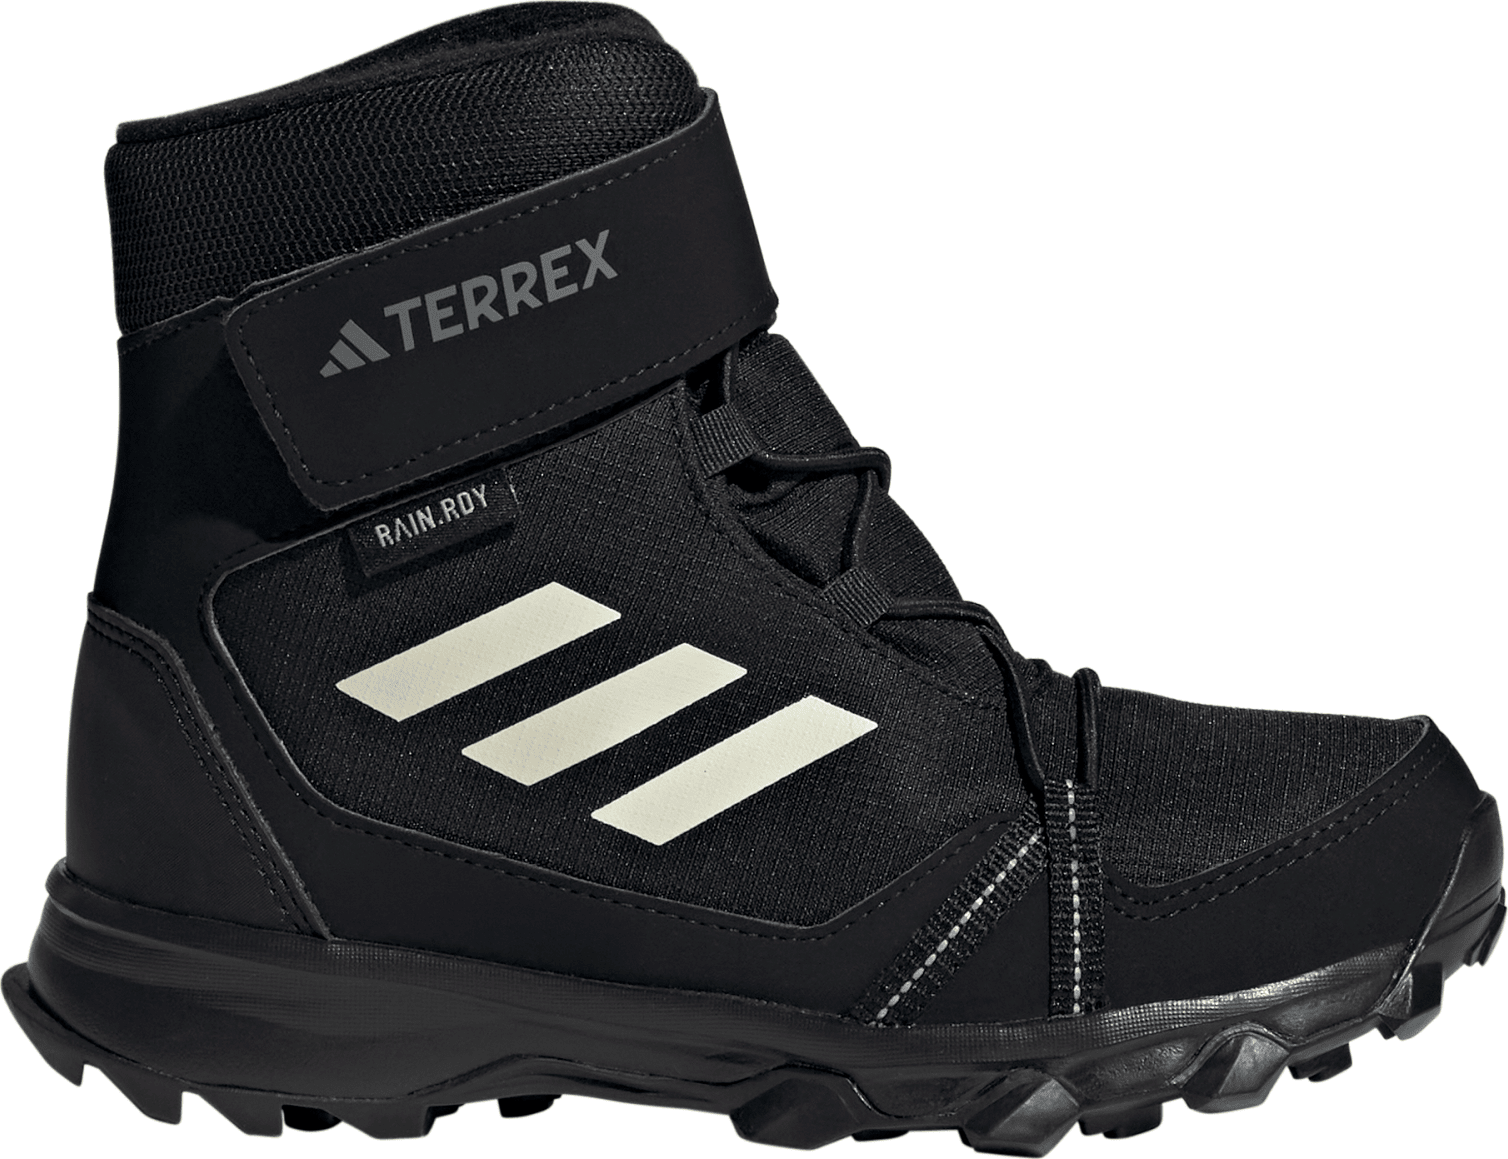 Adidas Kids' Terrex Snow Hook-and-Loop COLD.RDY Winter Shoes Cblack/Cwhite/Grefou